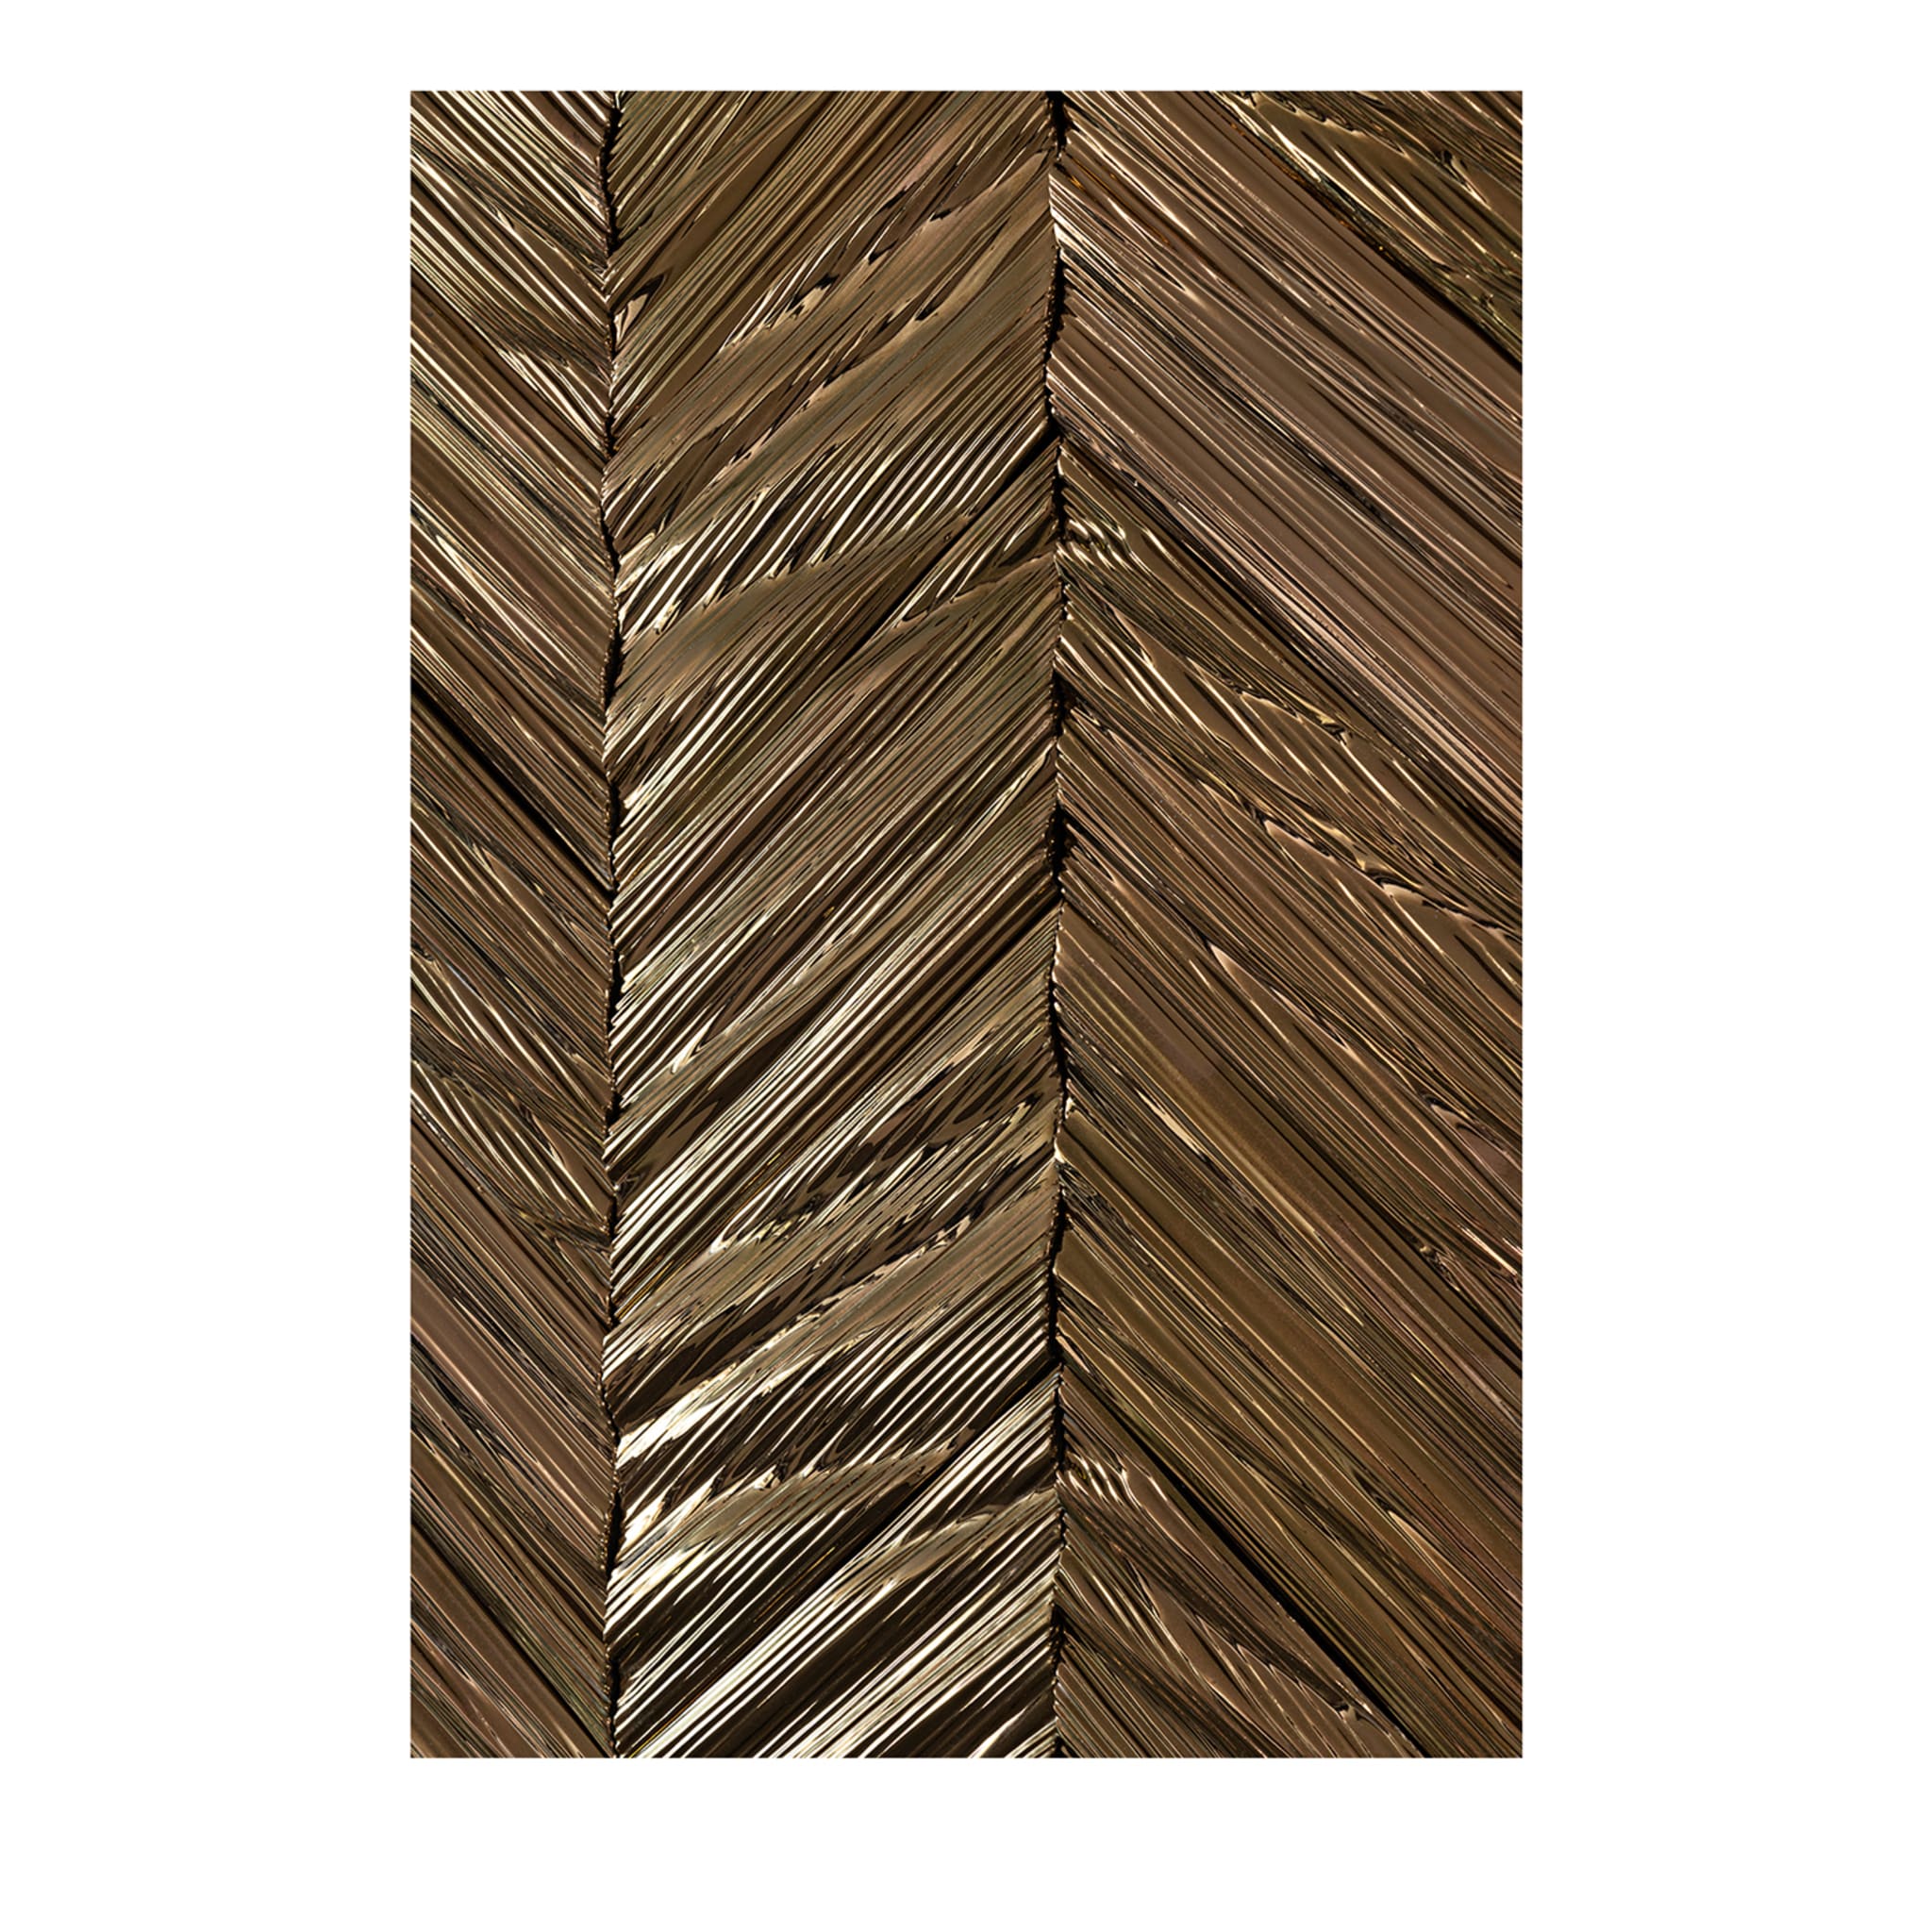 Calipso Bronzed Wall Covering by Giacomo Totti - Main view